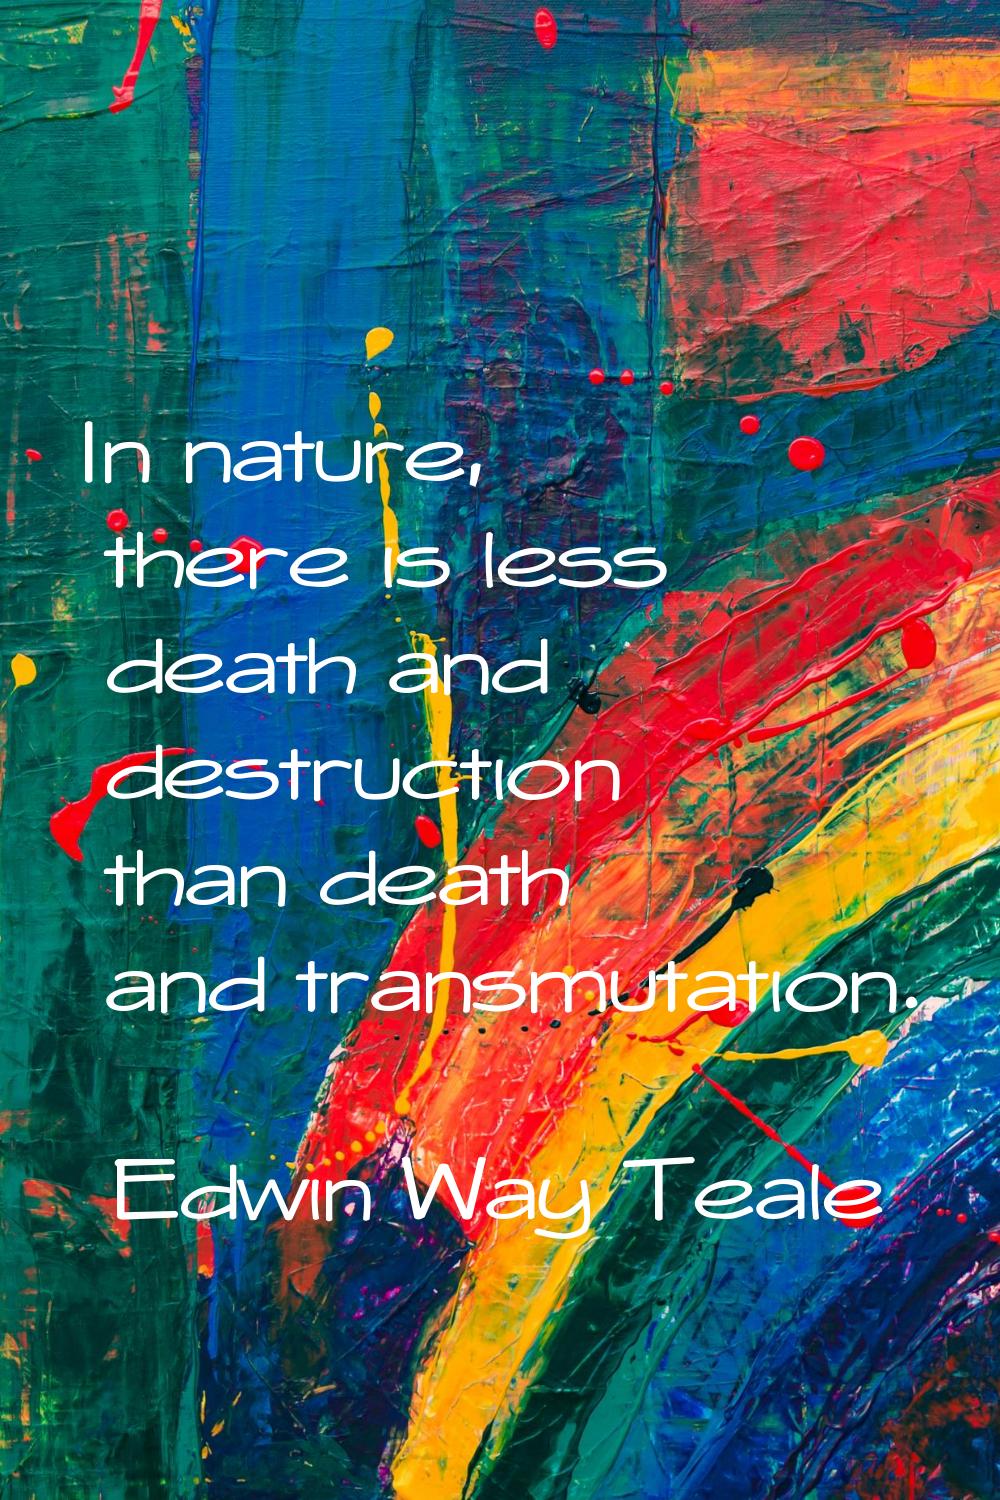 In nature, there is less death and destruction than death and transmutation.